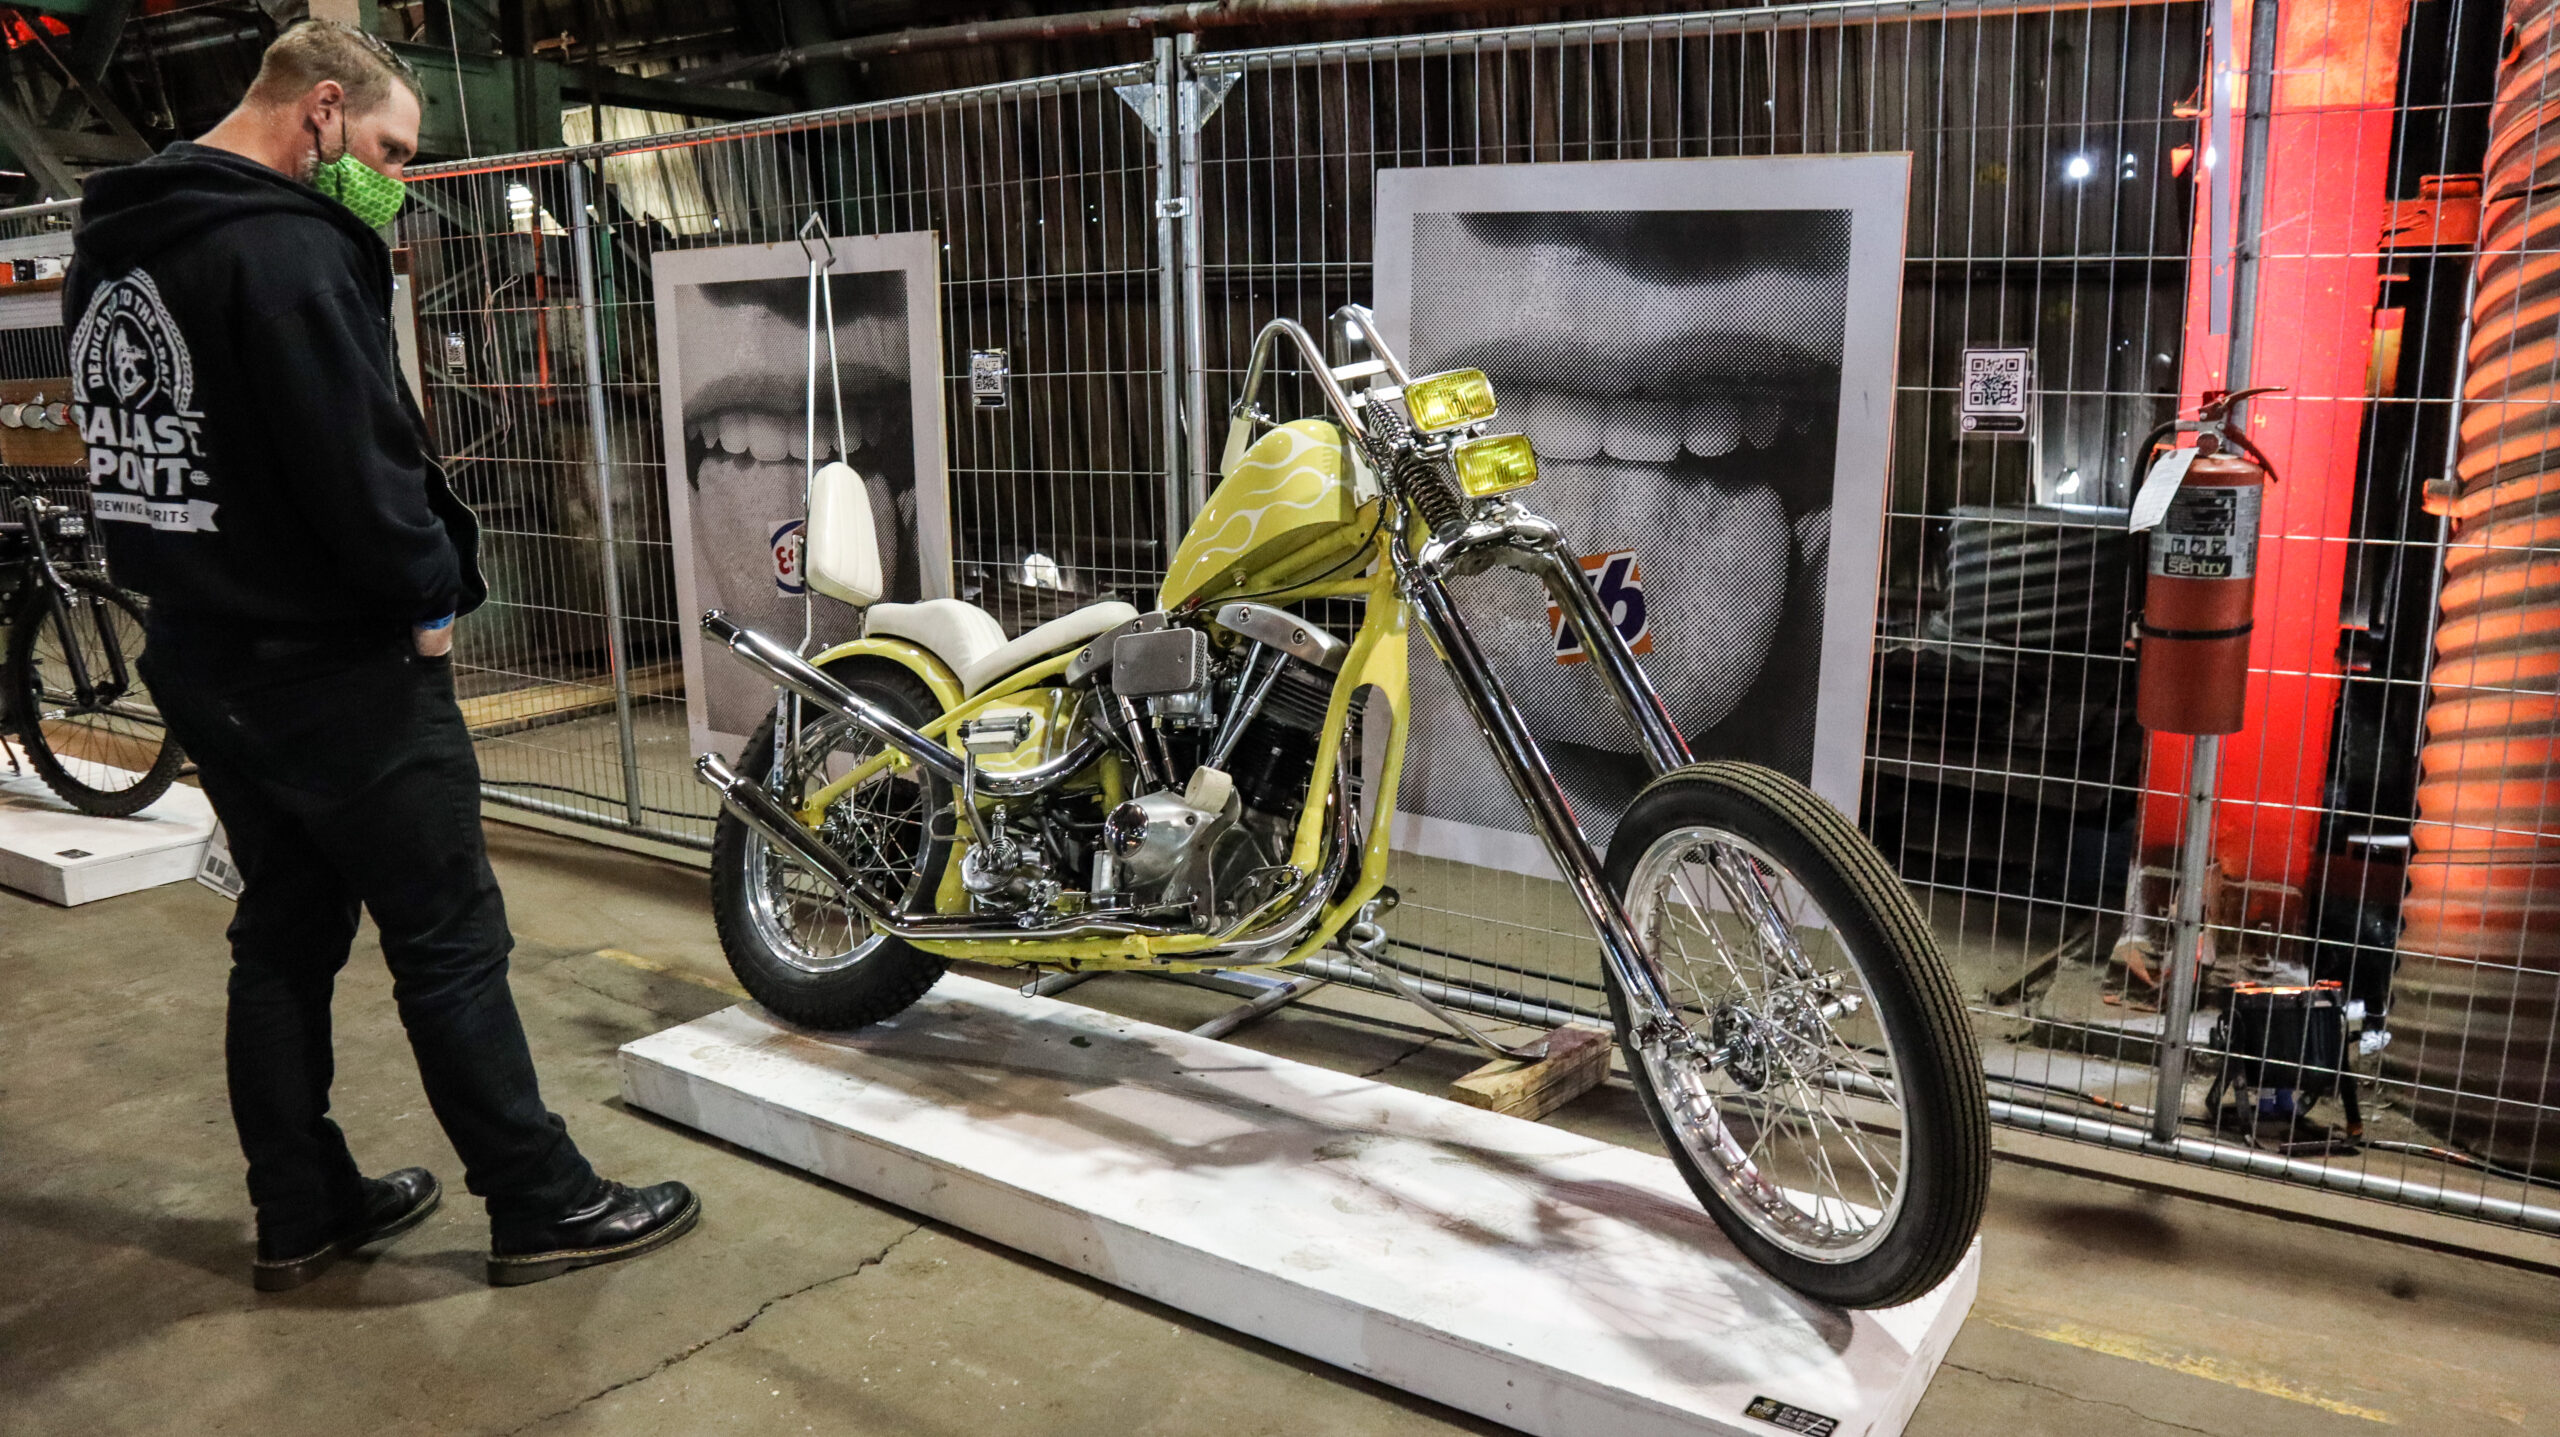 The One Moto Show 2021